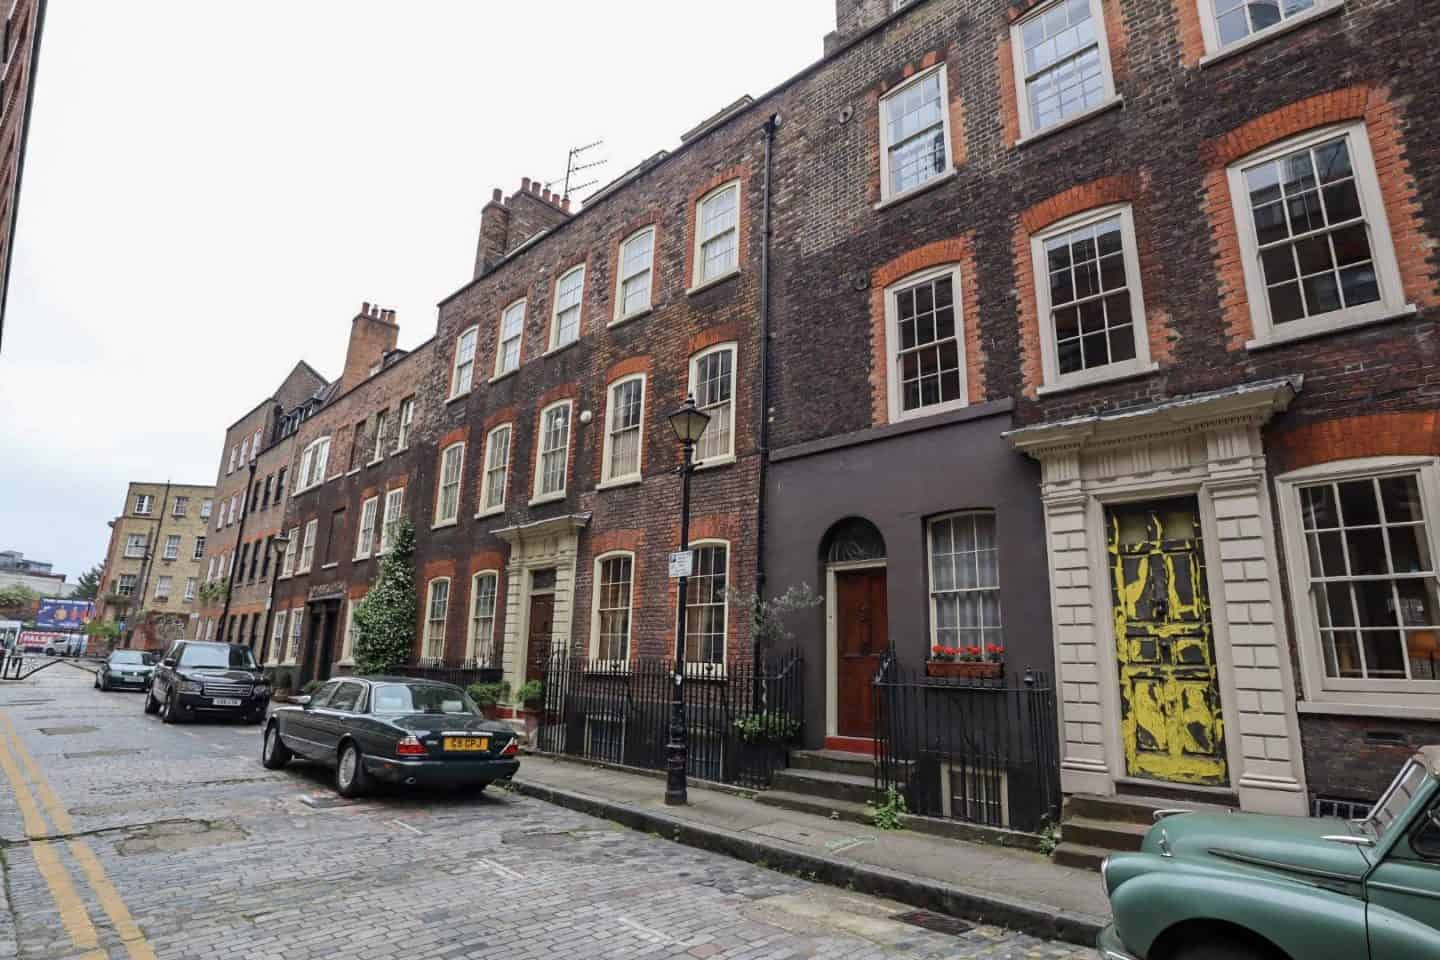 places to go in Shoreditch, Elder Street Old Buildings